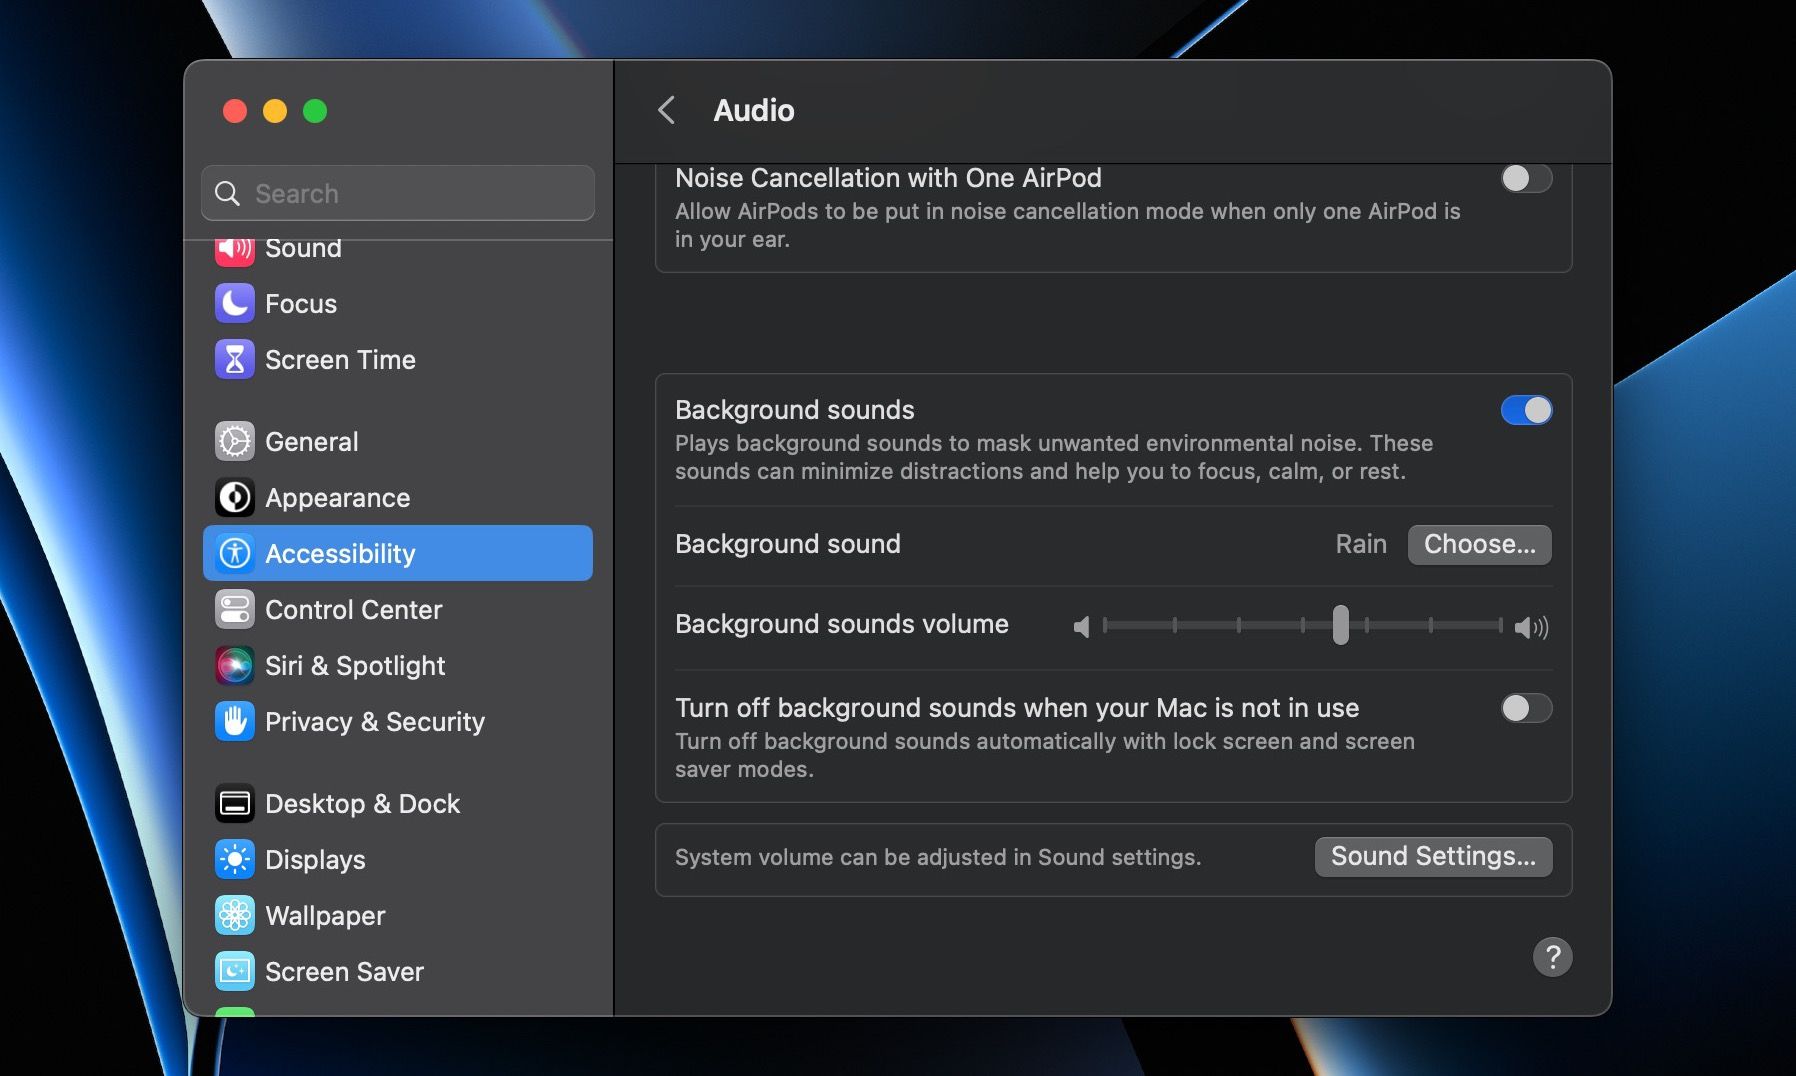 Enable the Background Sounds option in Audio accessibility settings